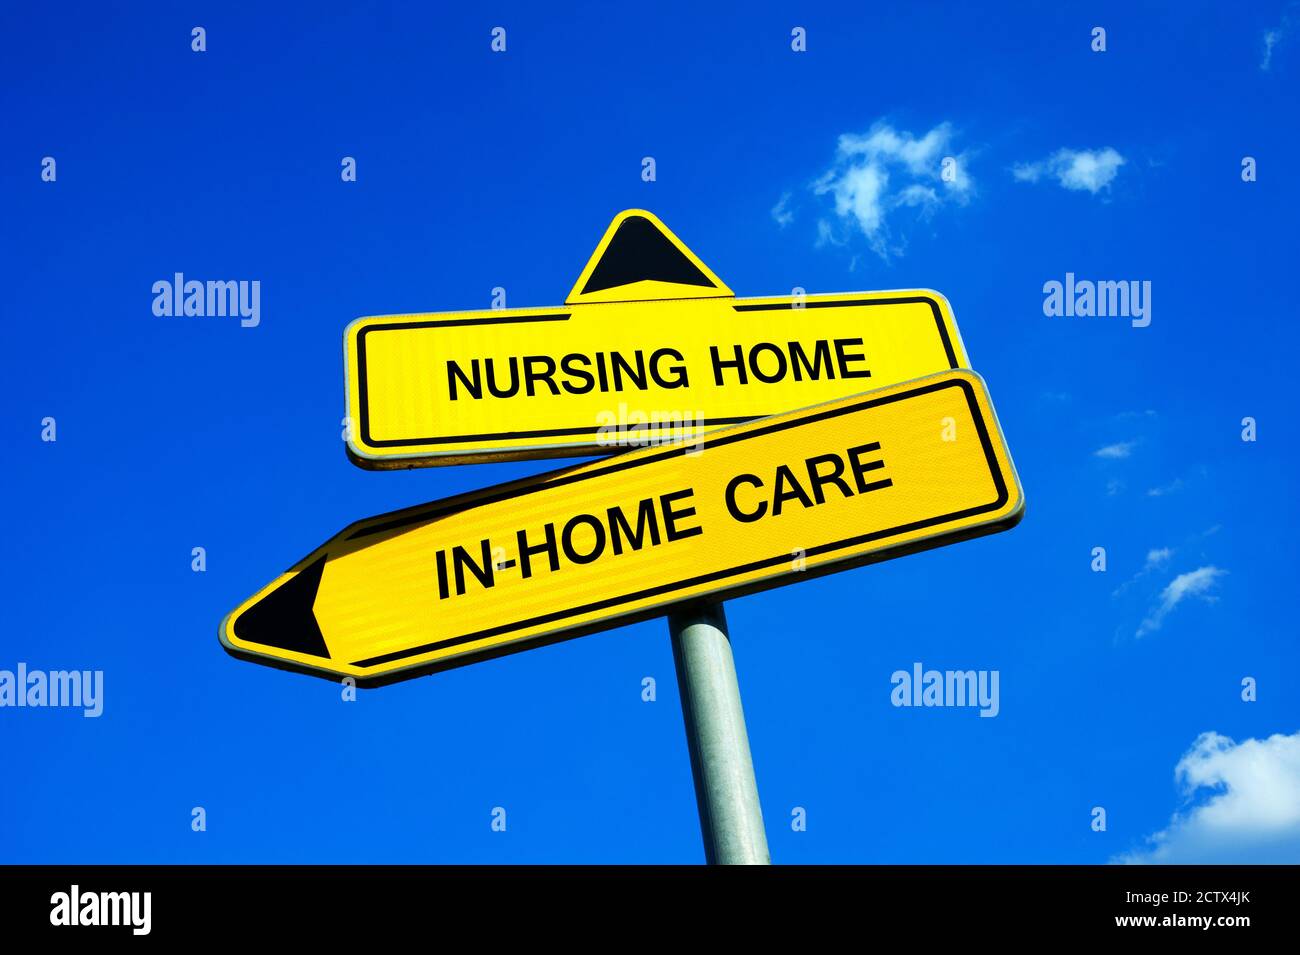 Nursing Home or In-Home Care - Traffic sign with two options - decision between types of senior housing for old and elderly people Stock Photo